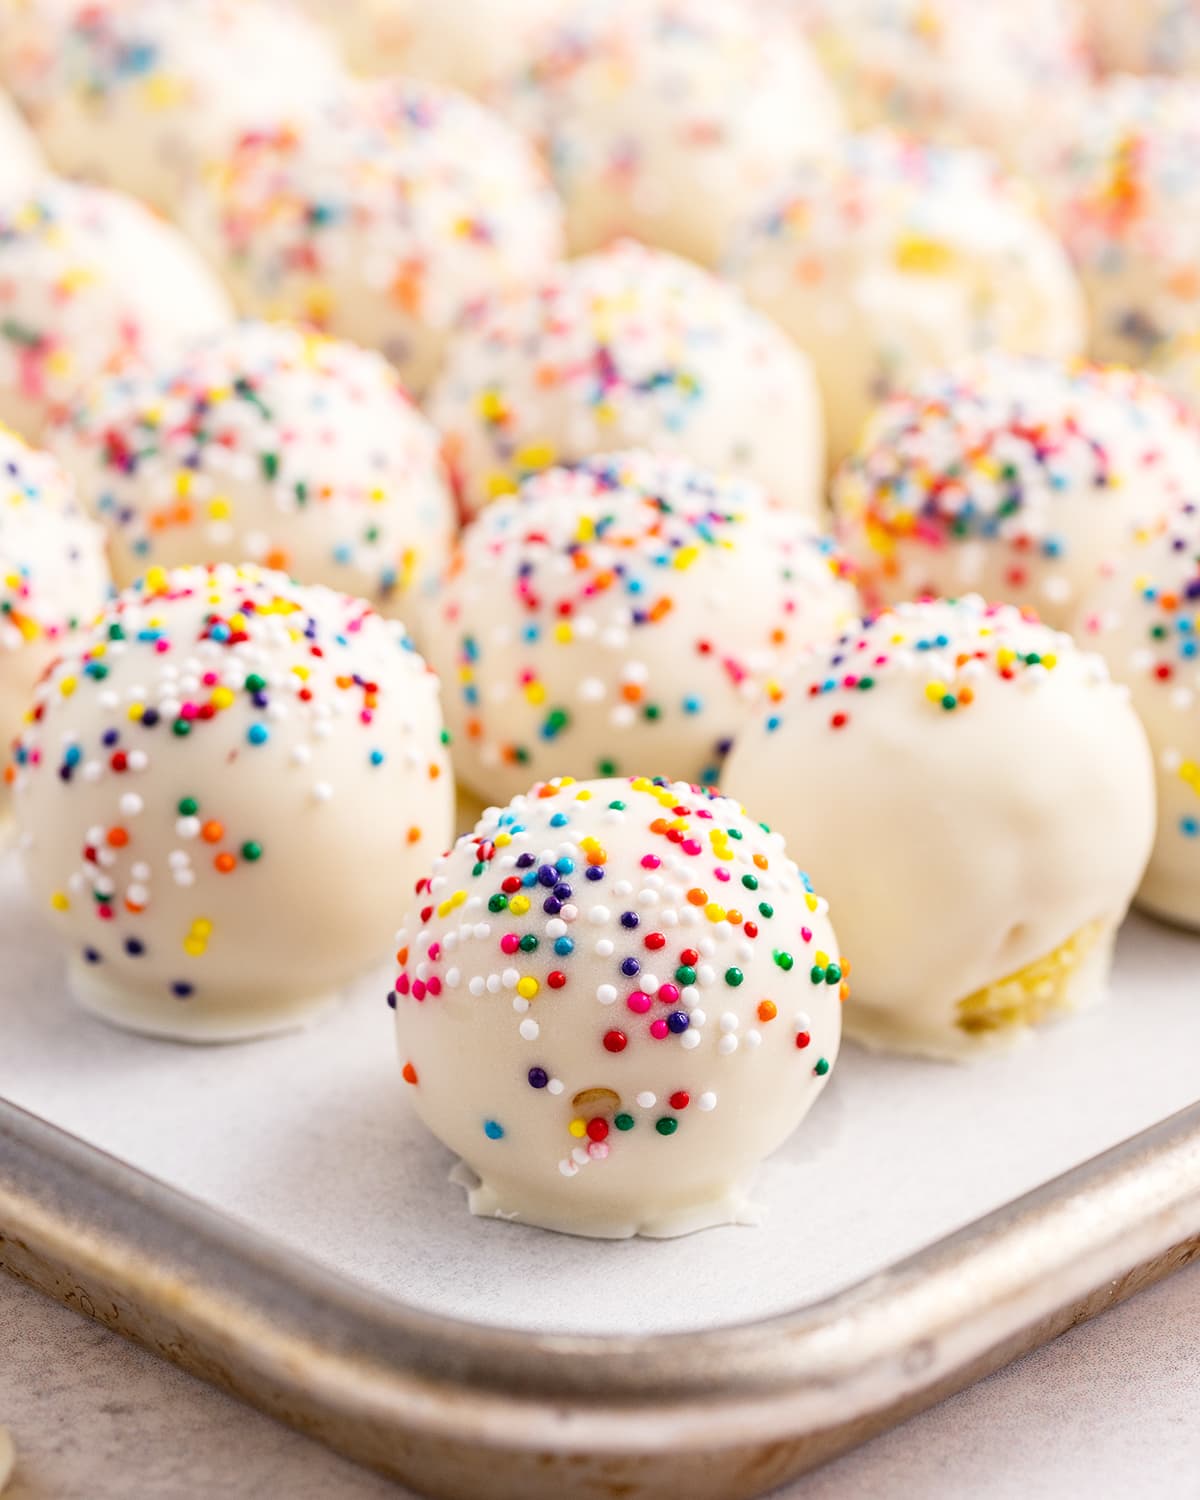 Cake balls pushed close together on a baking pan, they are topped with round rainbow colored sprinkles.